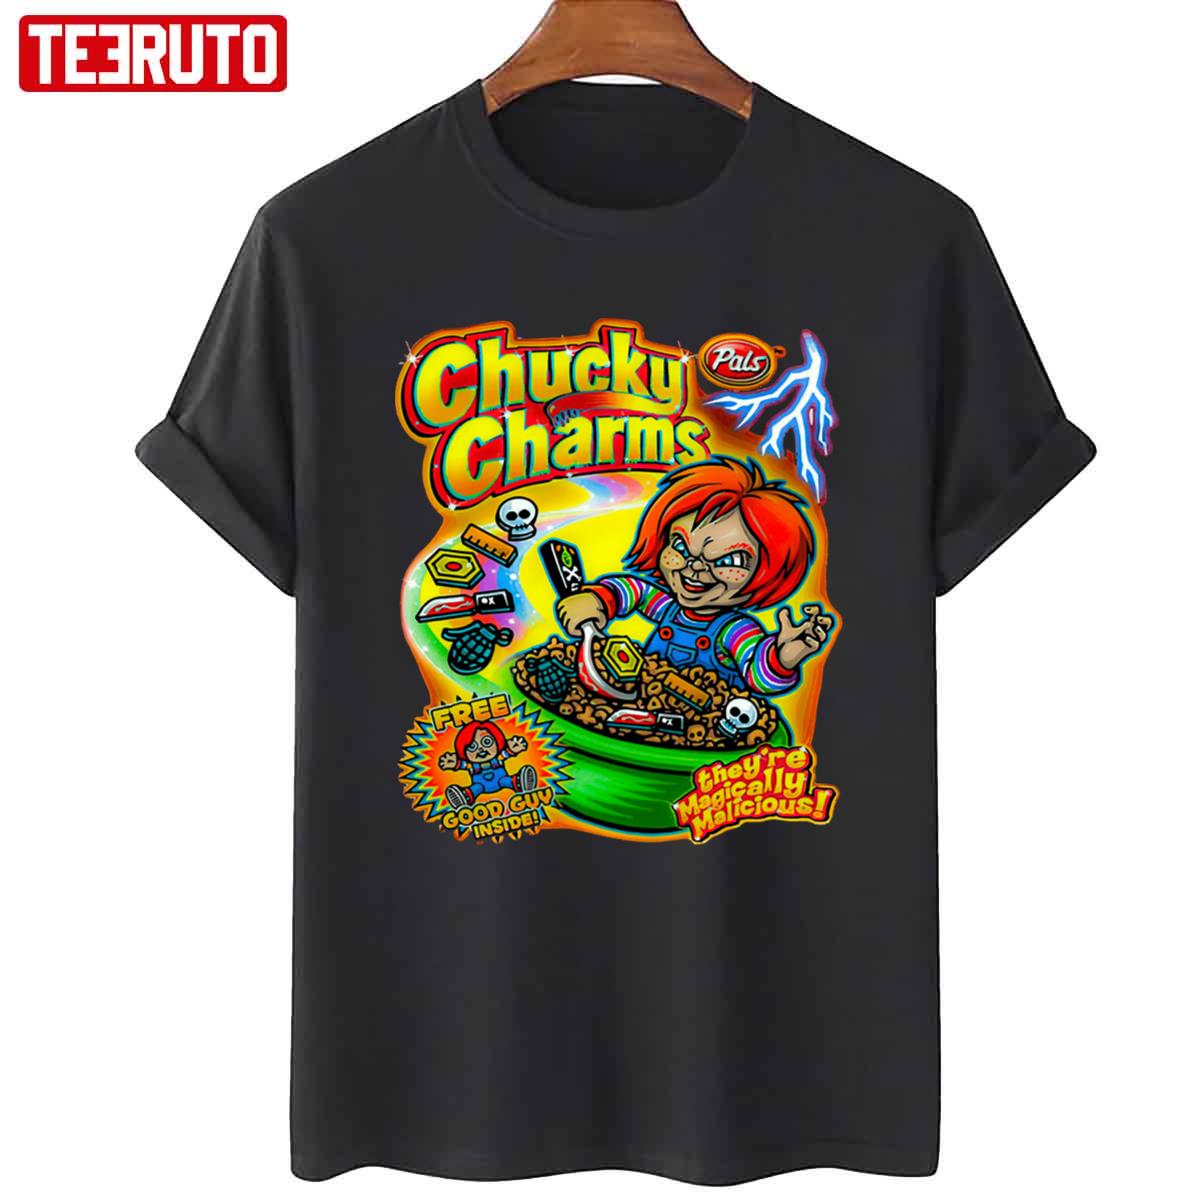 Pals Chucky Charms Bride Of Chucky Unisex T-Shirt